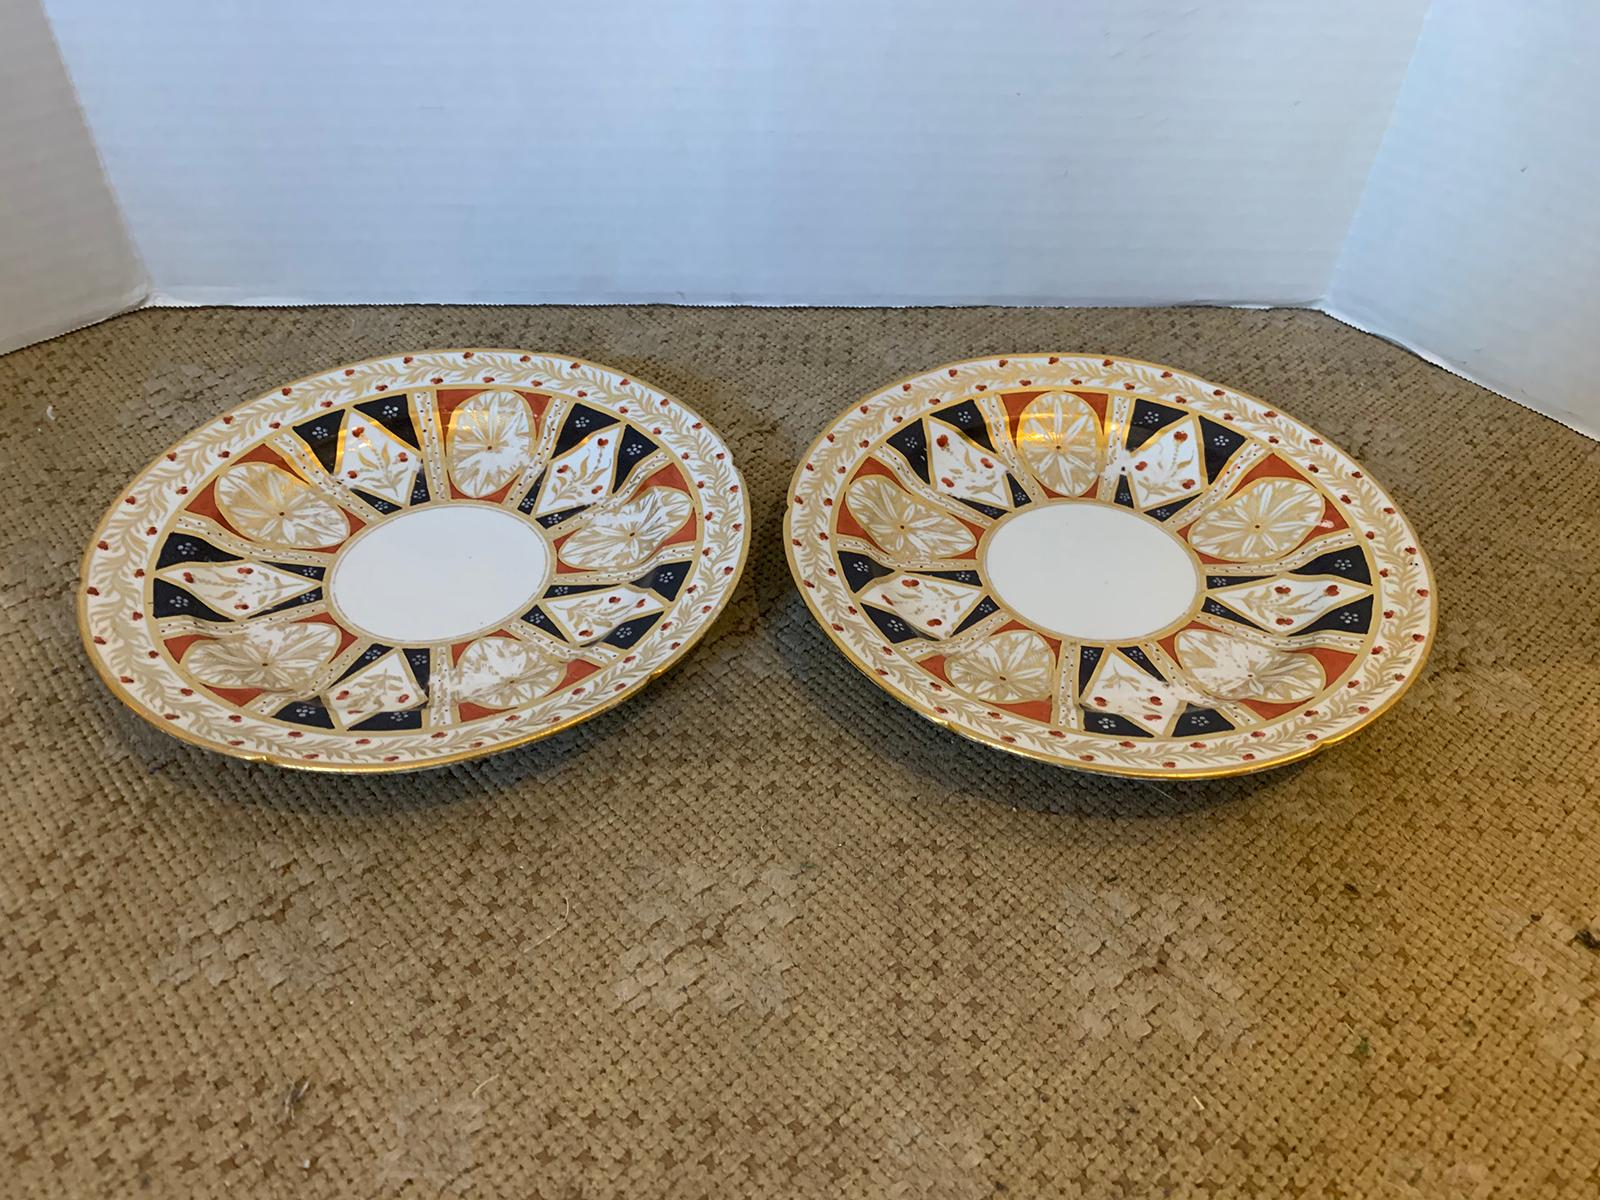 Pair of circa 1810 English Coalport Porcelain Plates with Gilt Detailing For Sale 1